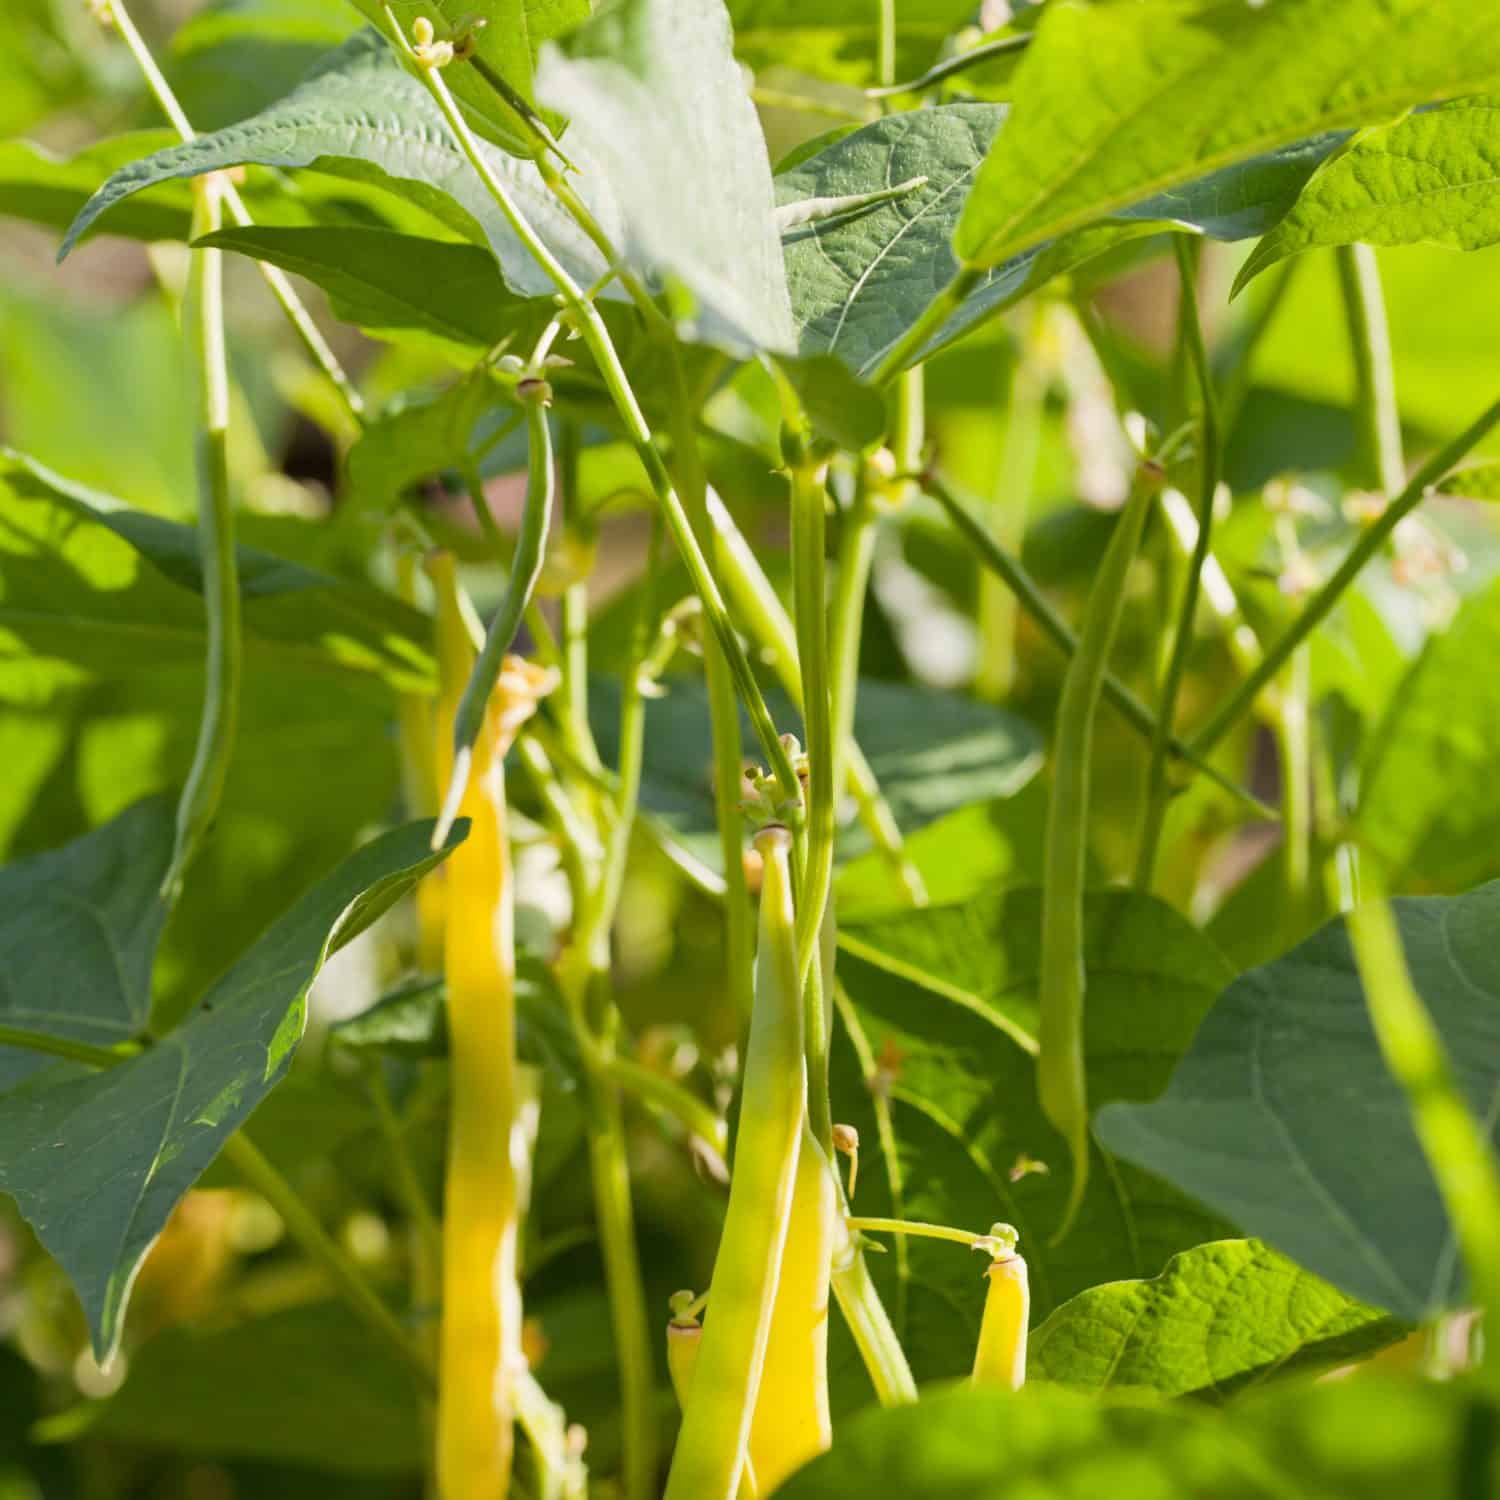 Phaseolus vulgaris - a bush of Dwarf Beans with yellow pods. Plant is called French Bean or Green Bean - producing healthy and delicious pods.